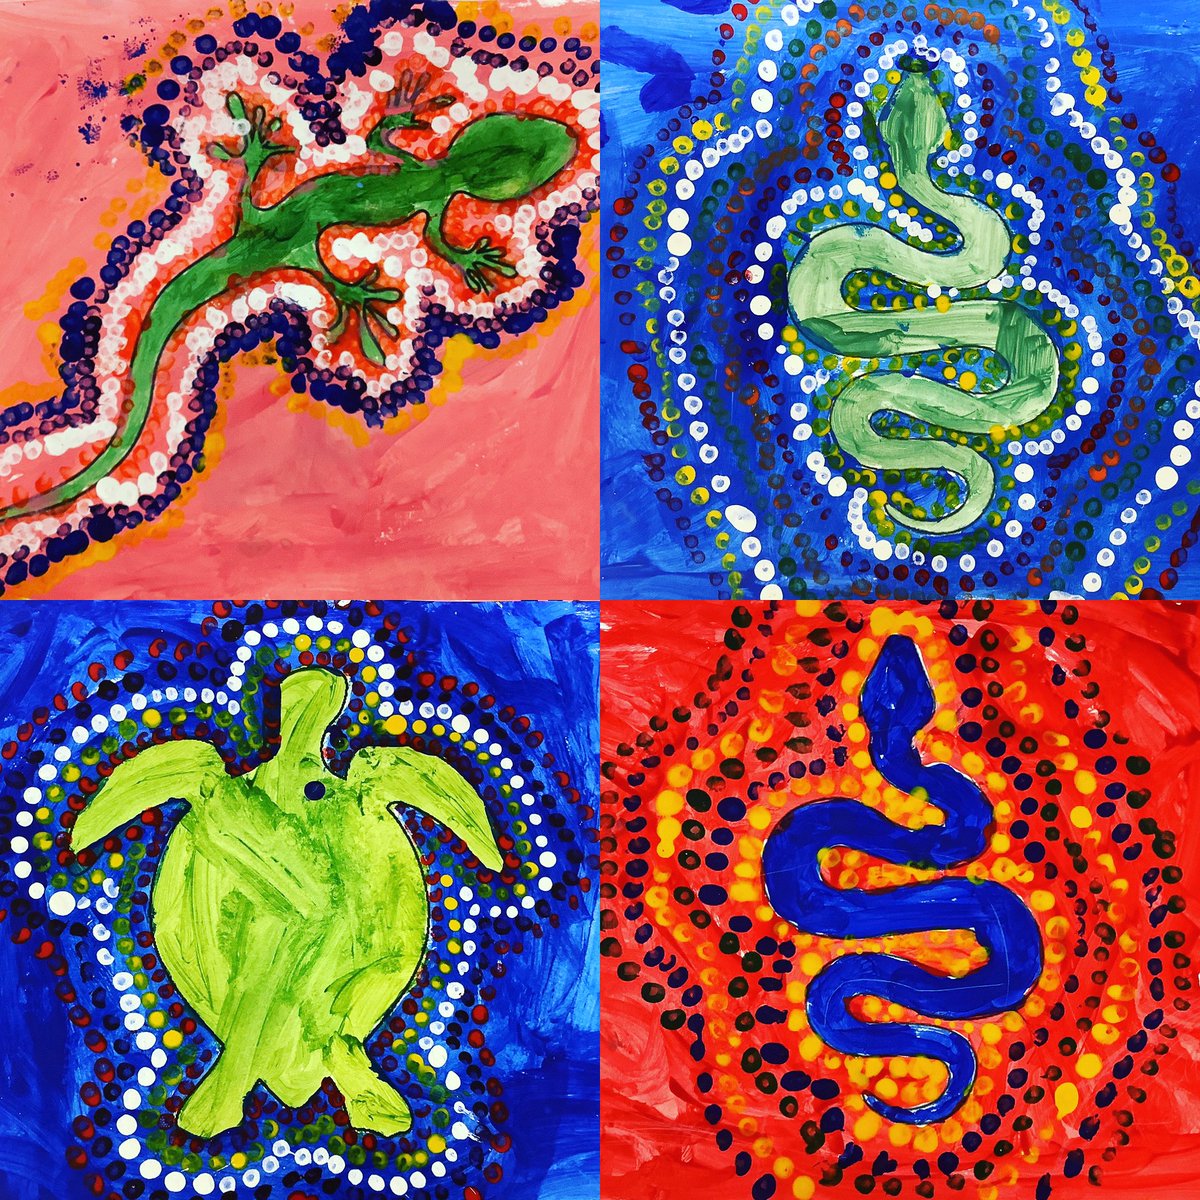 Year 2 have been learning about Aboriginal artists this half term. Here they created their own dot paintings in the Aboriginal style. Next they will be progressing their learning by discovering the meanings of the symbols in Aboriginal Songline painting. #aboriginalart #ks1art